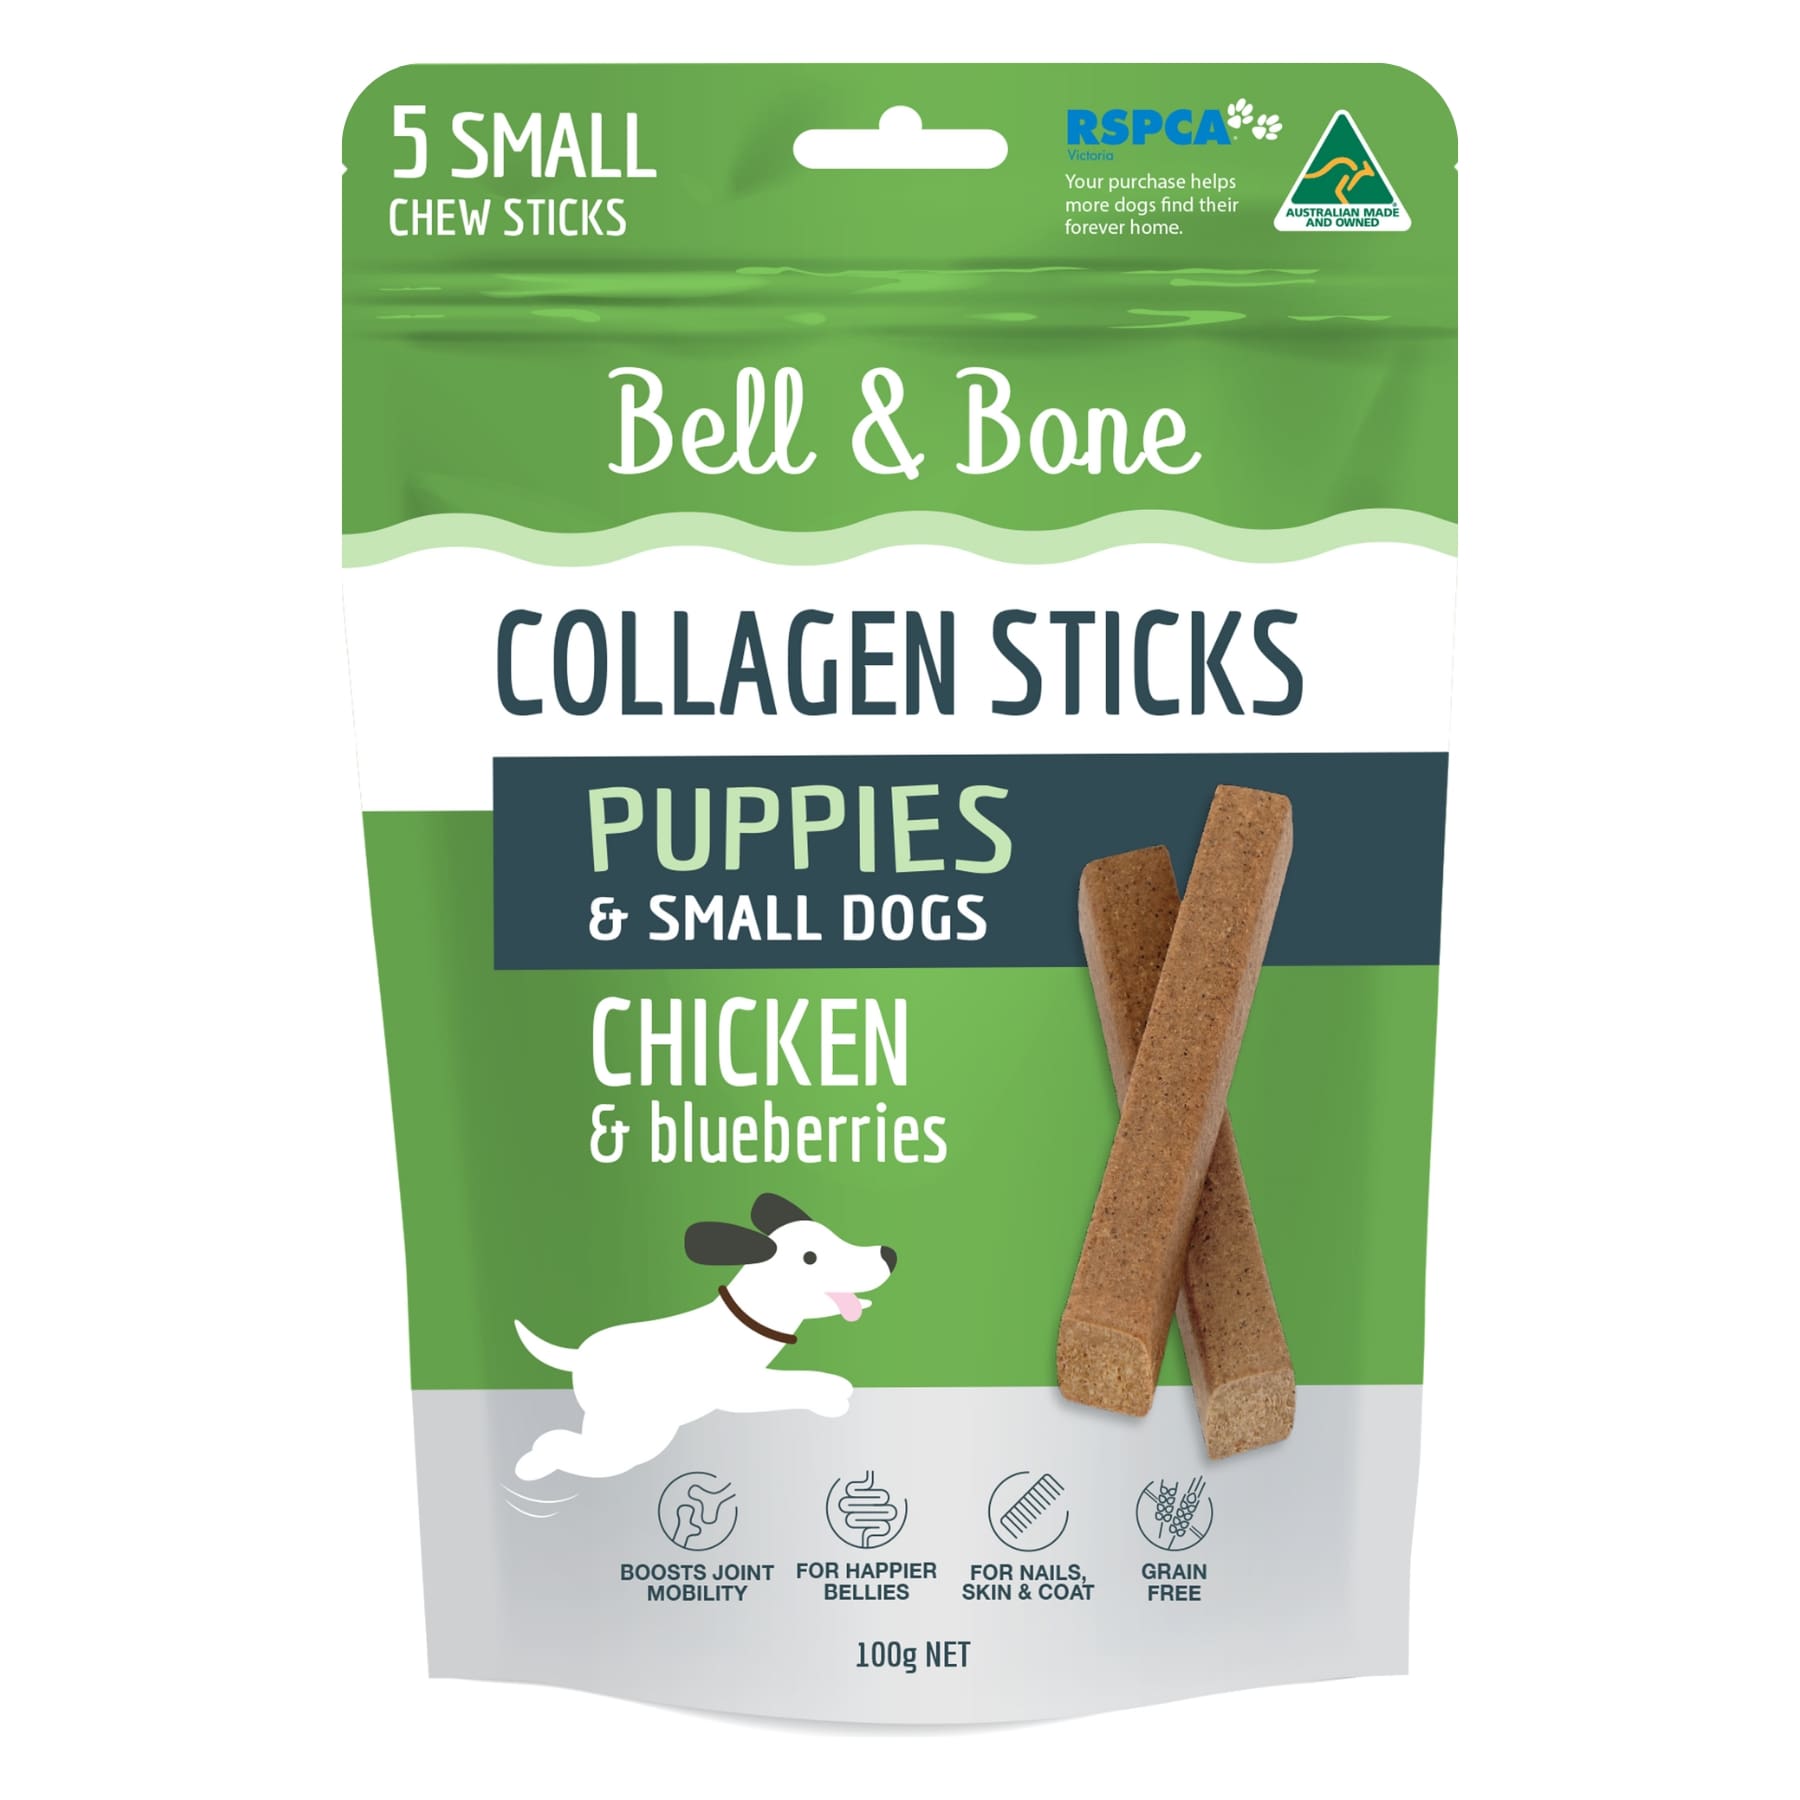 Bell & Bone Chicken and Blueberry Collagen Sticks for Puppies and Small Dogs. Australian Made Dog Treats